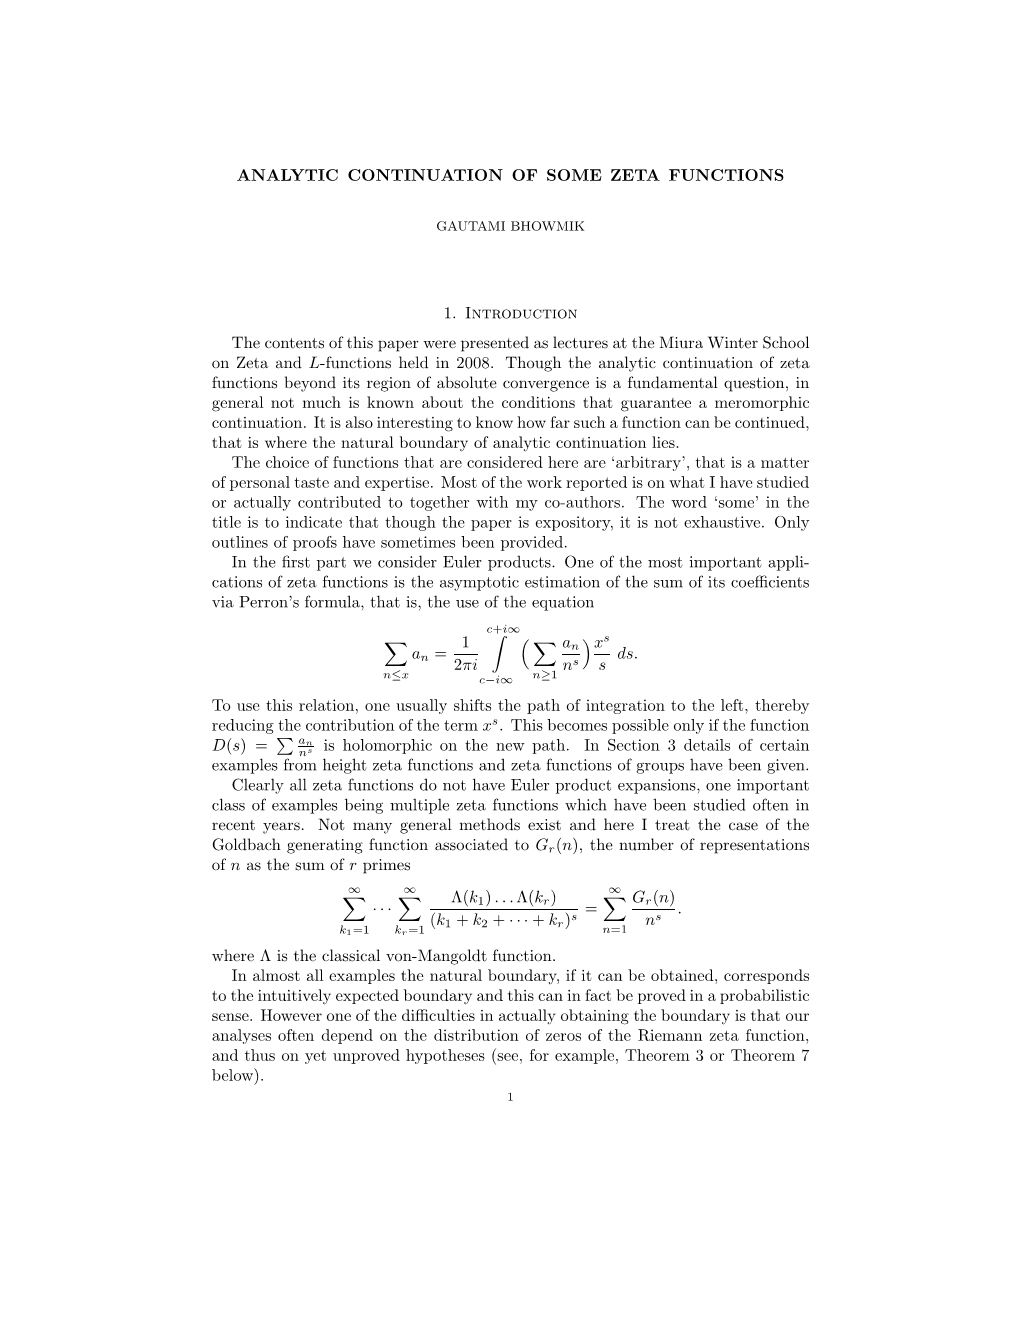 ANALYTIC CONTINUATION of SOME ZETA FUNCTIONS 1. Introduction the Contents of This Paper Were Presented As Lectures at the Miura